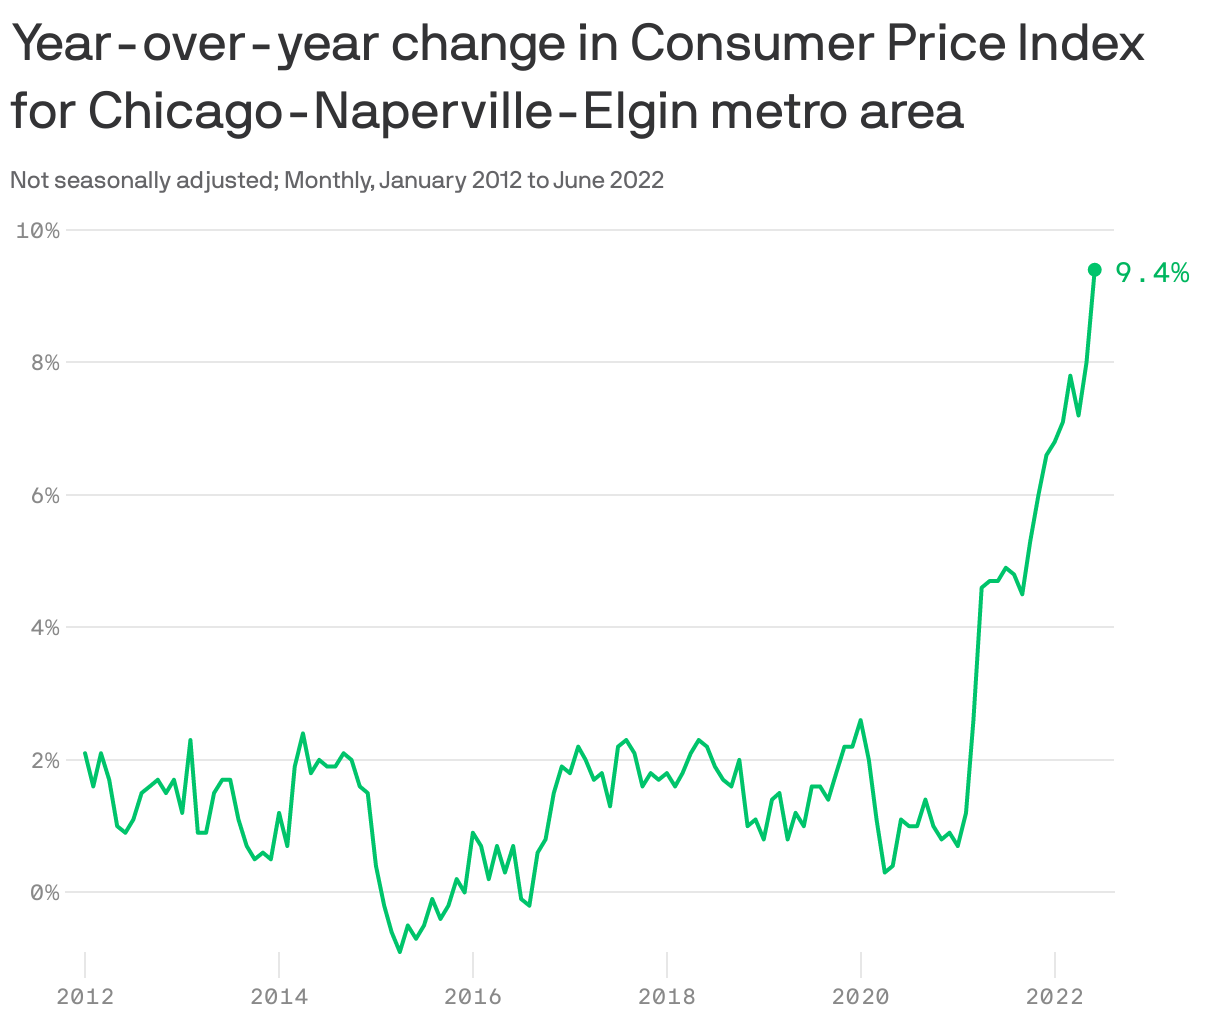 Year-over-year change in Consumer Price Index for Chicago-Naperville-Elgin metro area